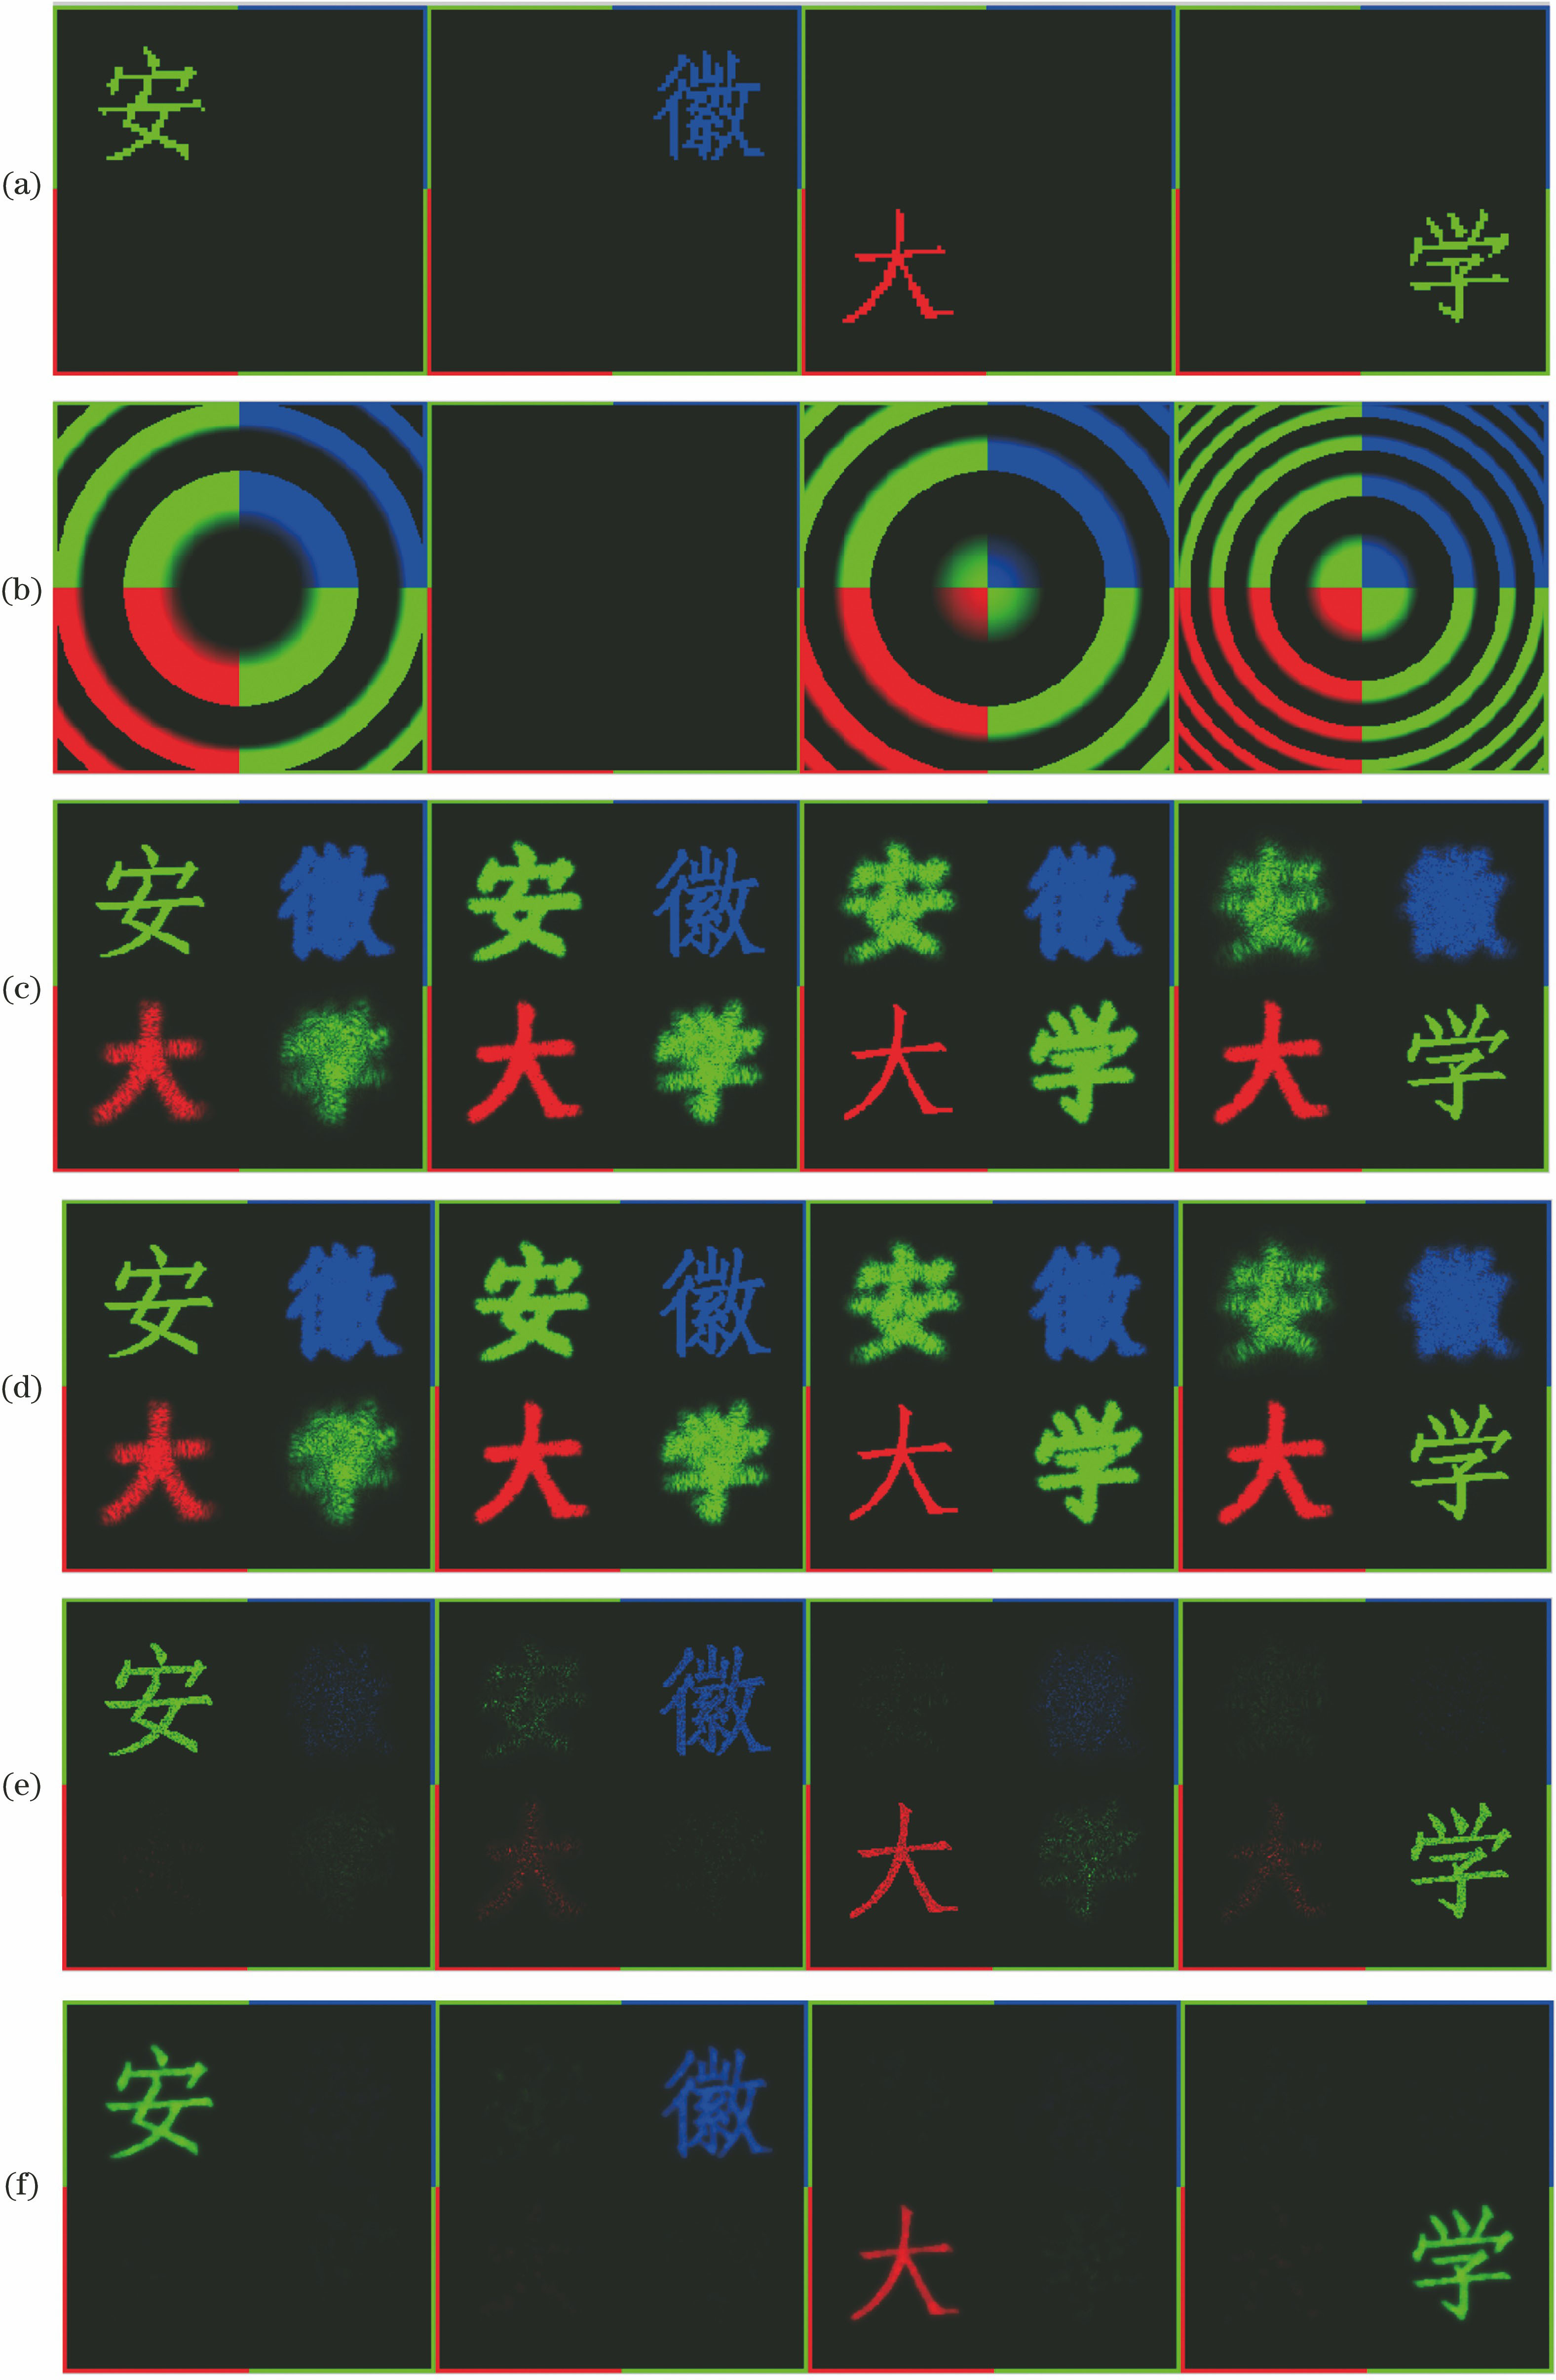 Simulation results of color tomography of binary diffuse object. (a) 3D object; (b) phase distributions of propagation kernels; (c) back propagation of single speckled realization; (d) back propagation averaged by 30 speckled realizations; (e) back propagation of 30 speckled realizations using Tikhonov regularization; (f) compressive reconstruction of 30 speckled realizations